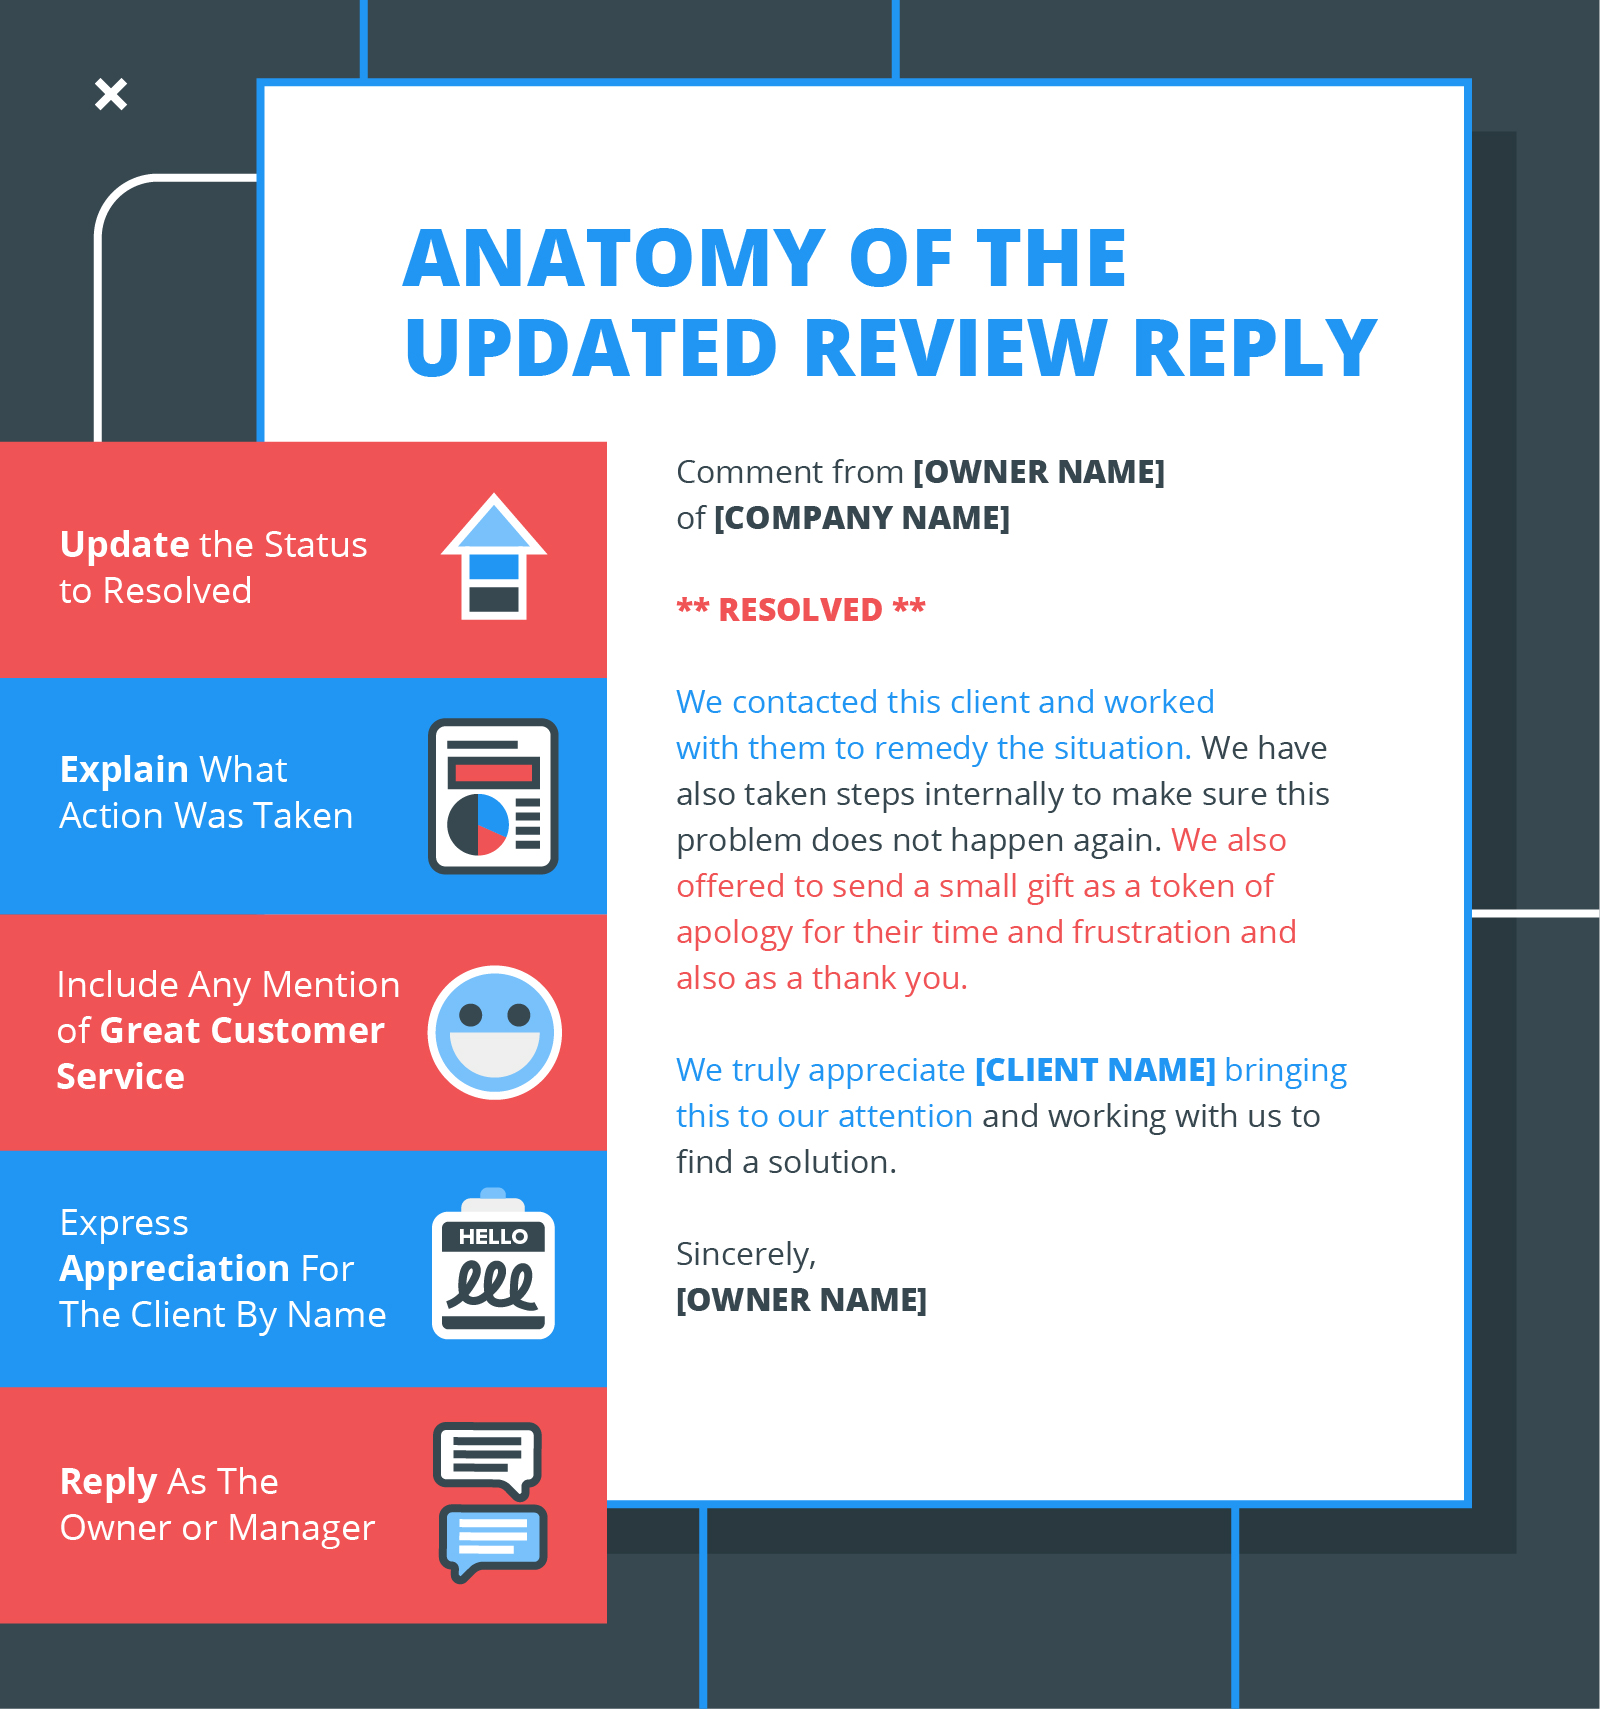 template for updating the review response from the company when action has been taken to remedy the situation.